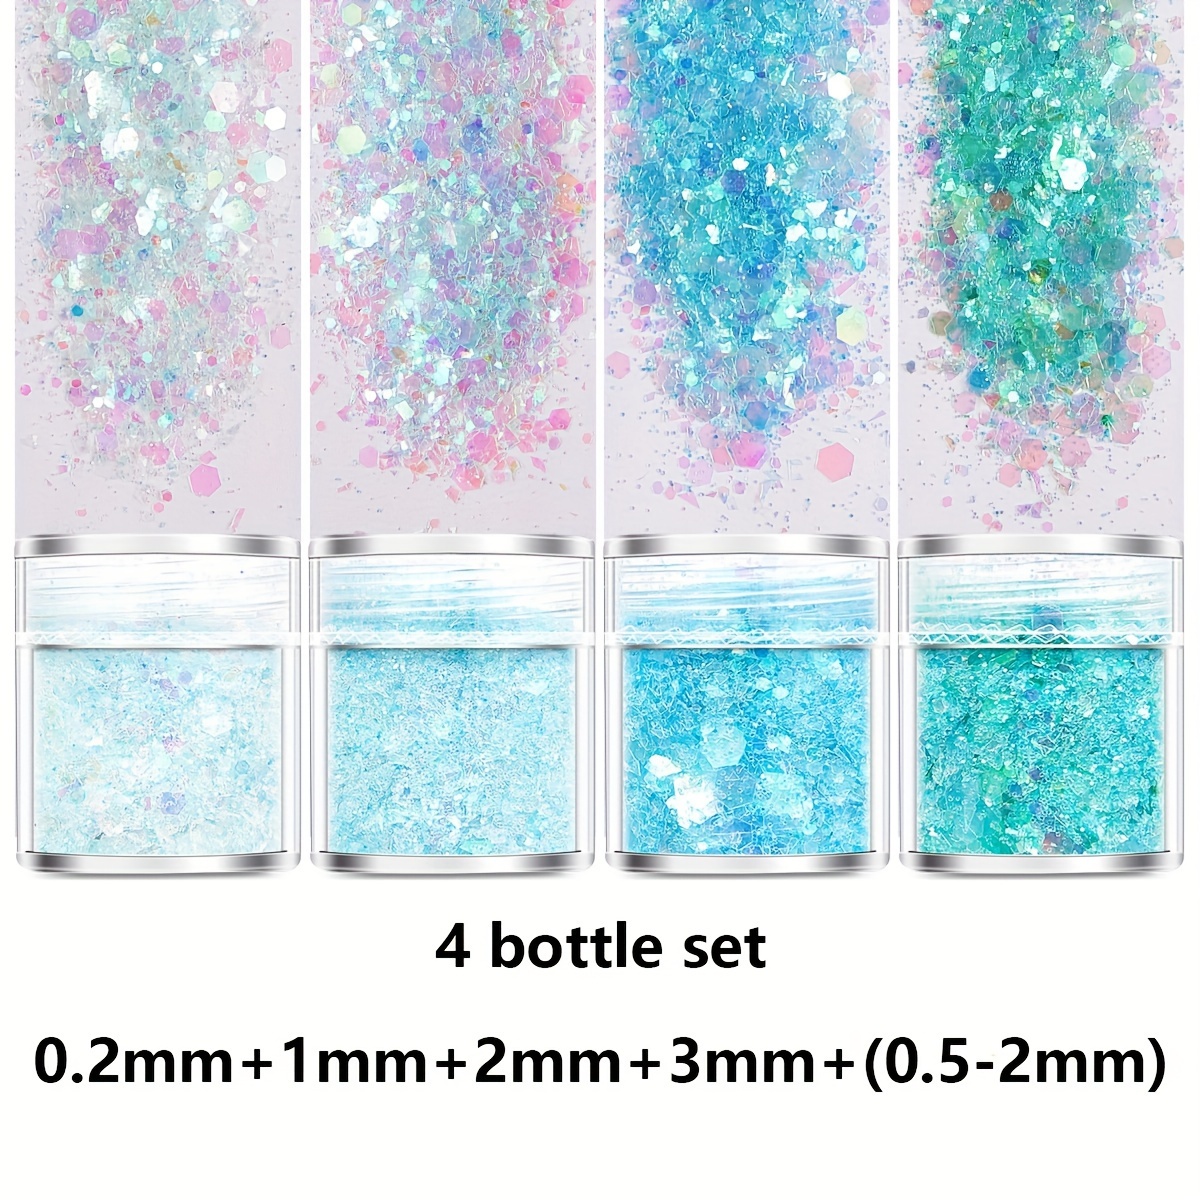 Holographic Chunky Glitter, 100g Royal Gold Cosmetic Craft Glitter for  Epoxy Resin, Nail Sequins Iridescent Flakes, Body, Face, Hair, Nail, Glitter  Slime Making